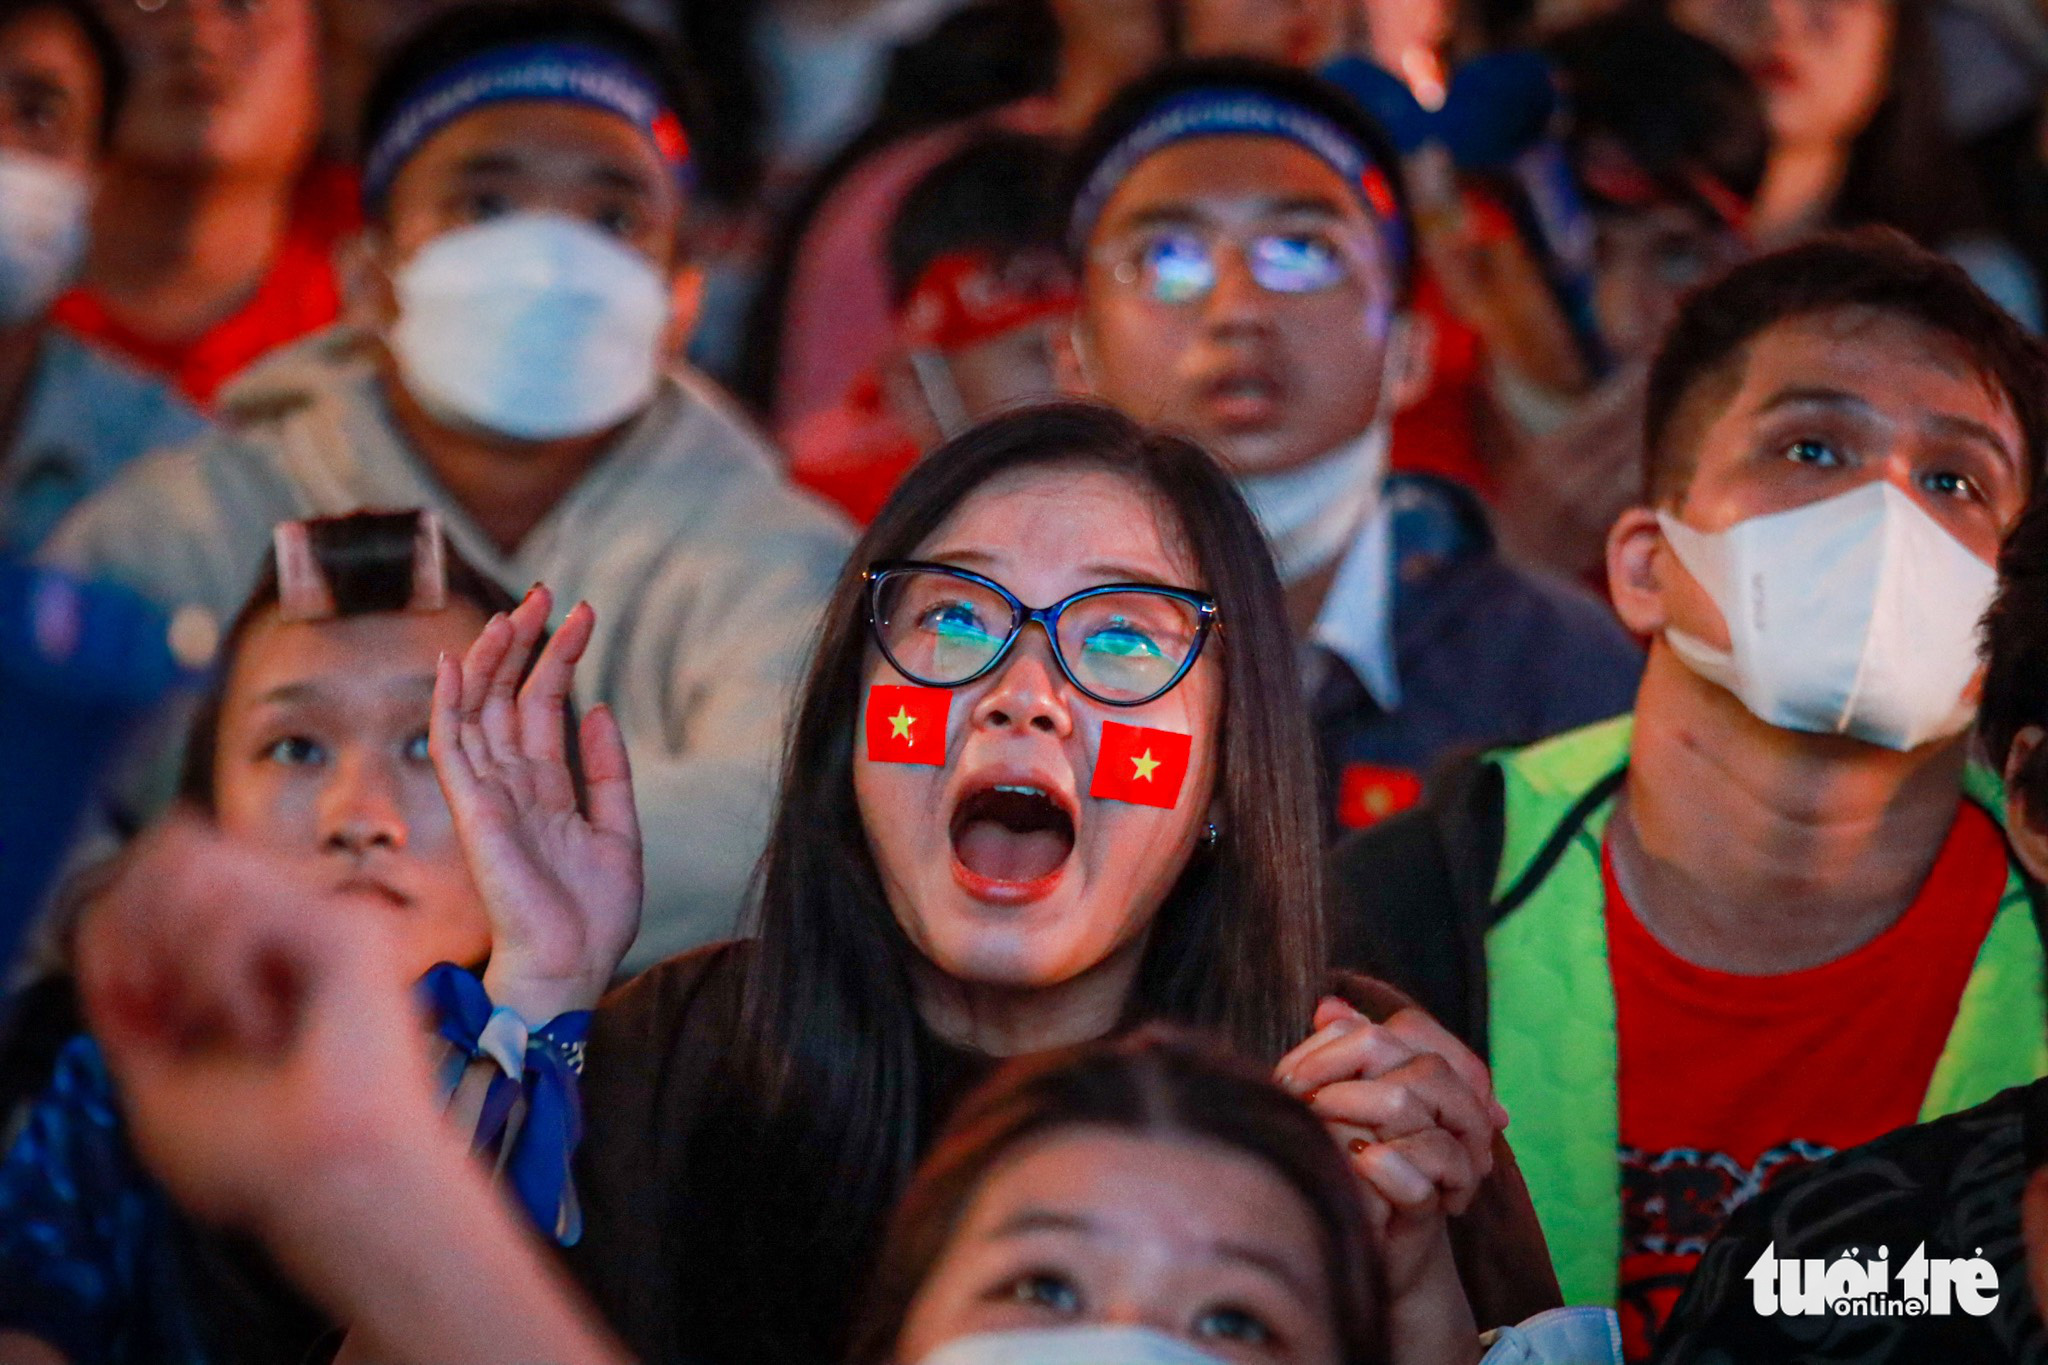 A fan reacts to a goal miss during the Vietnam - Malaysia men’s football semifinal at the 31st Southeast Asian (SEA) Games at the Nguyen Hue Pedestrian Street in District 1, Ho Chi Minh City, May 19, 2022. Photo: Minh Duy / Tuoi Tre